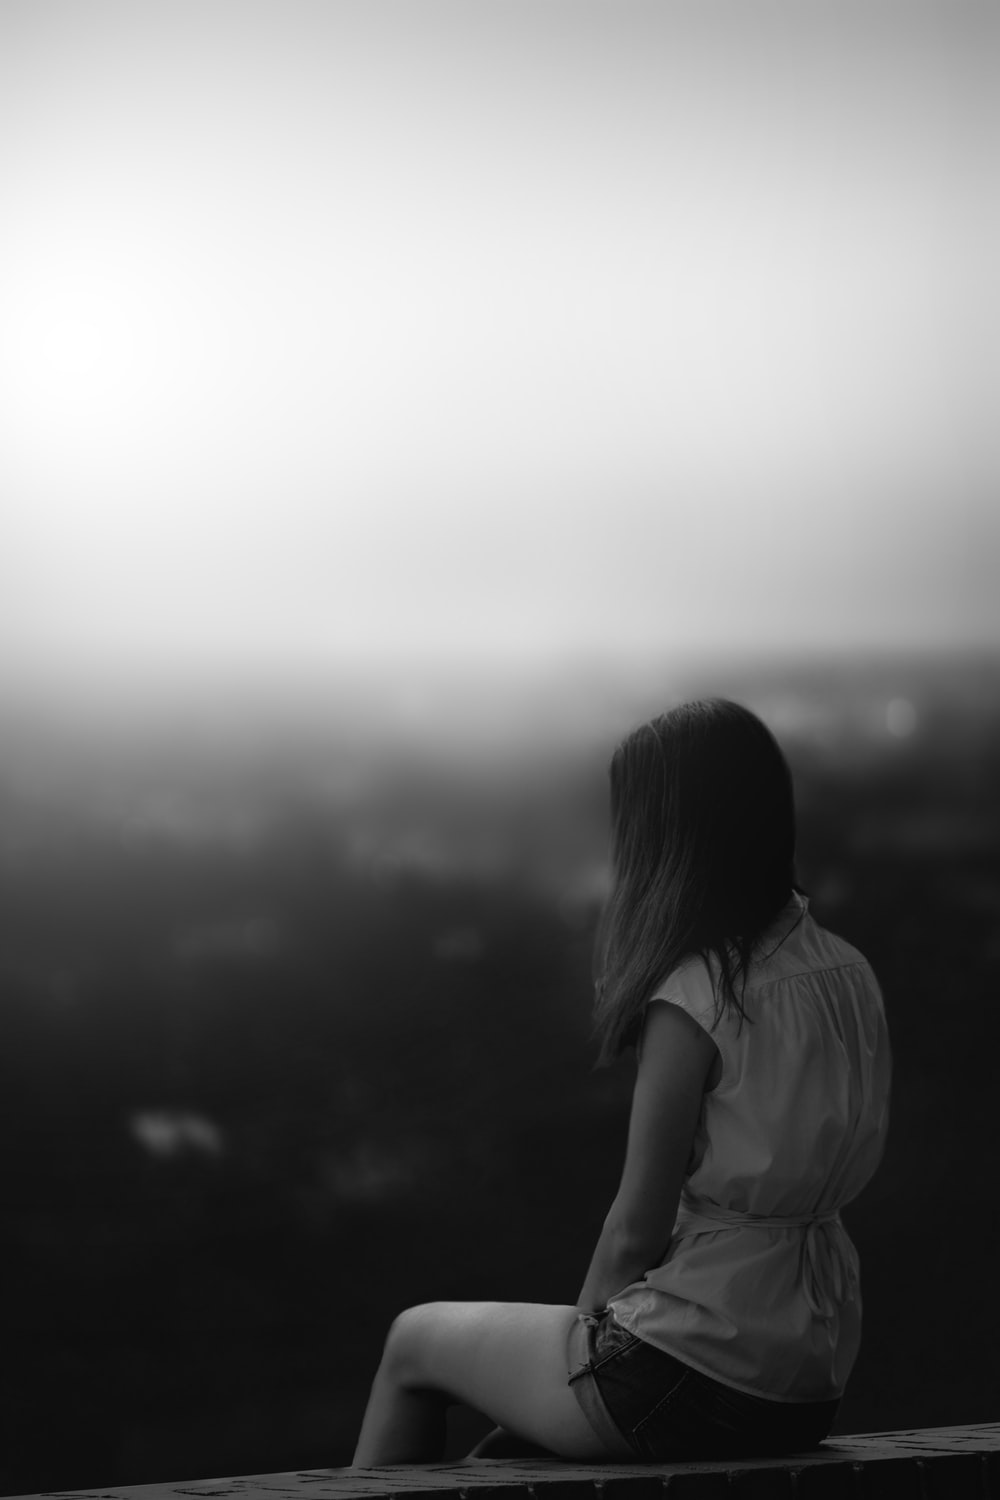 500+ [HQ] Girl Alone Pictures  Download Free Images on Unsplash